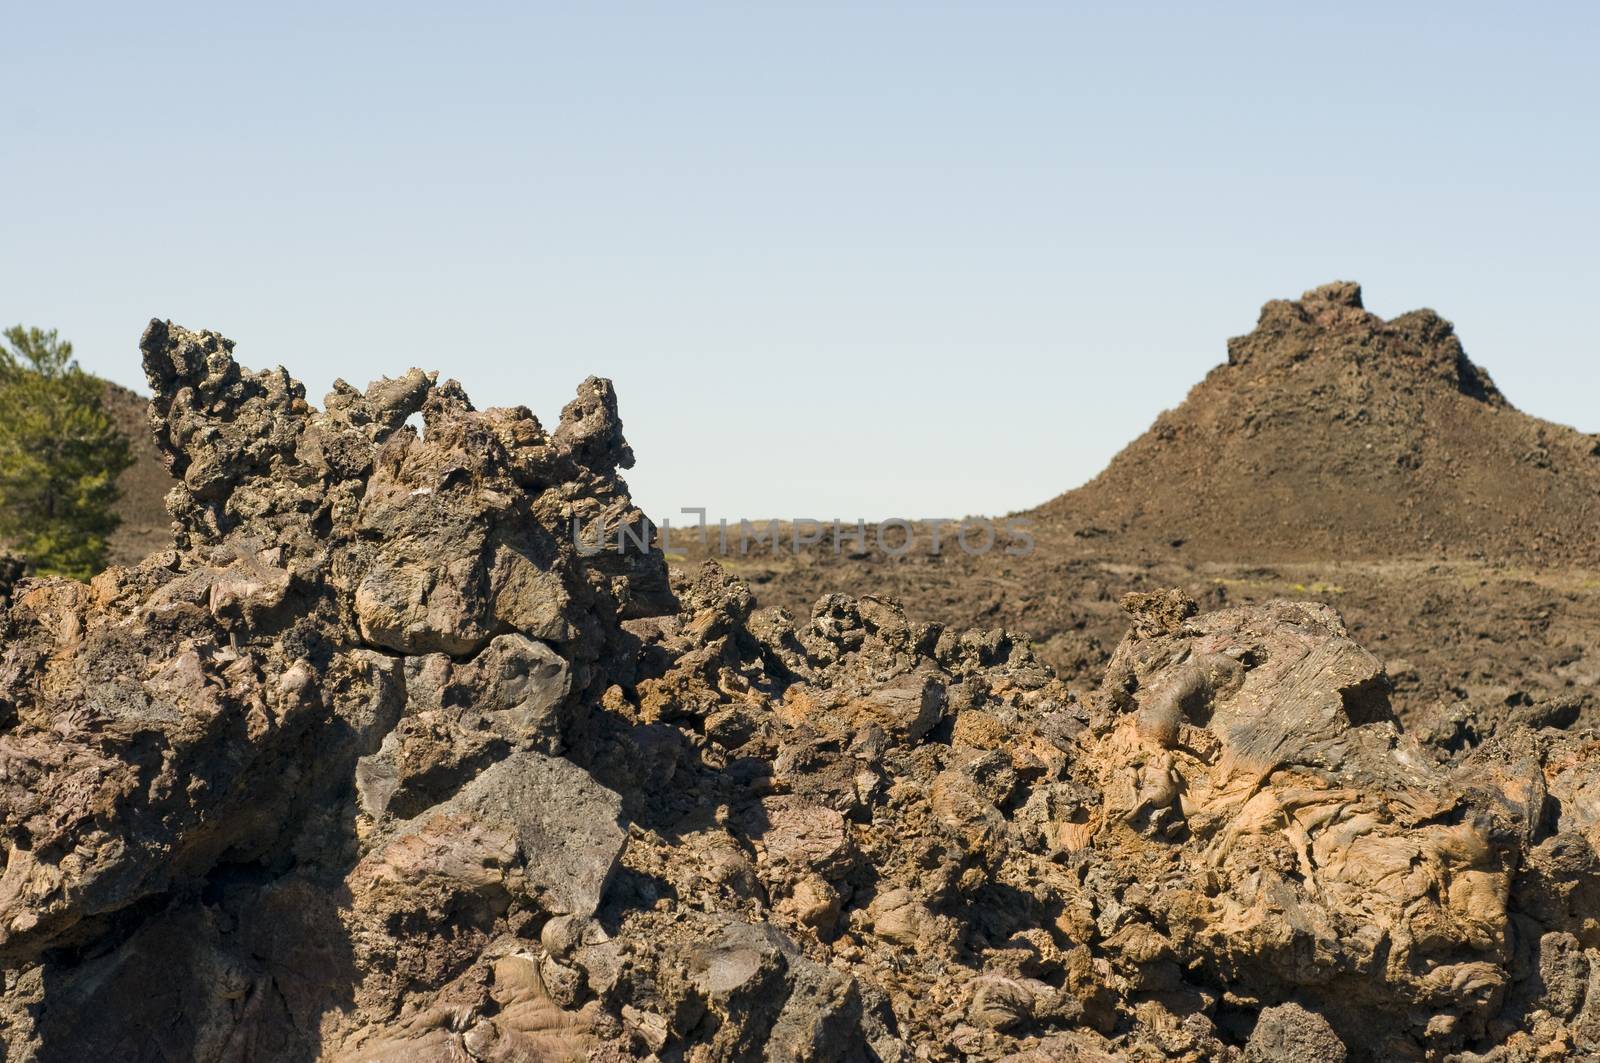 Block lava fragments and landscape of the Craters of the Moon National Monument and Preserve, Idaho